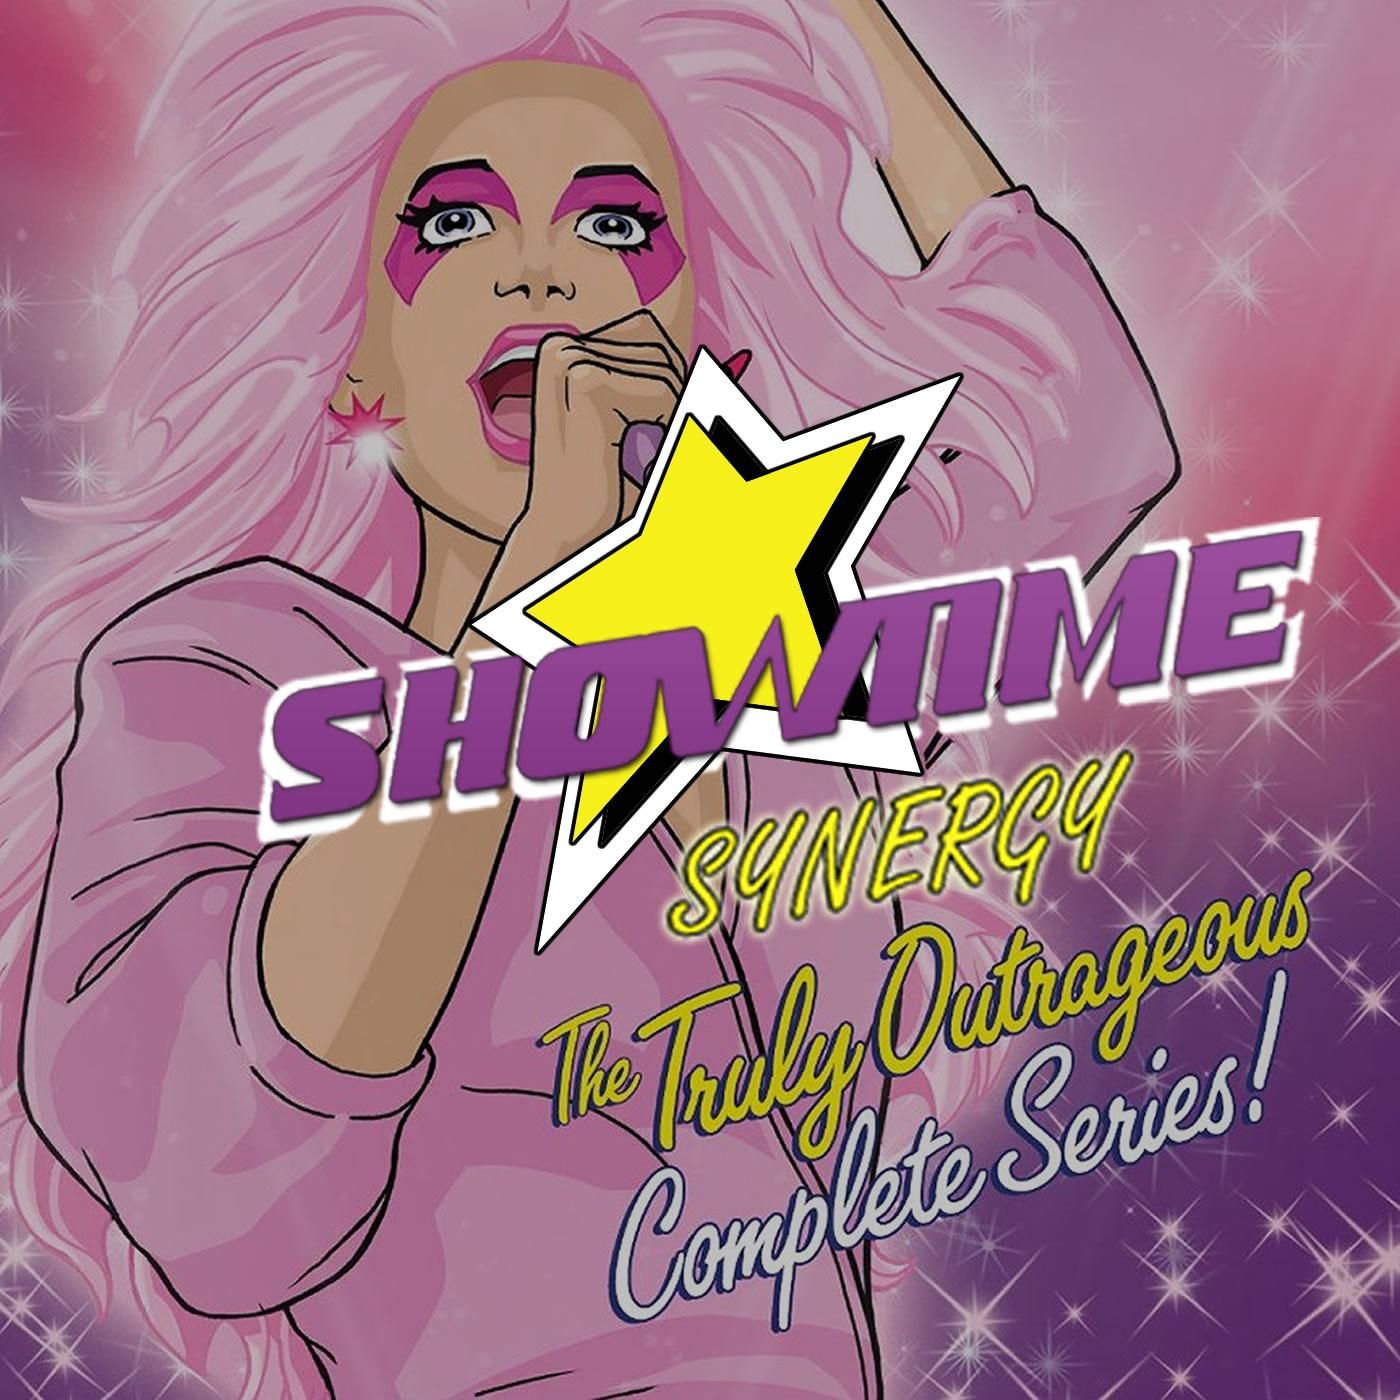 ShowTime Synergy – Jem and the Holograms Trailer Talk